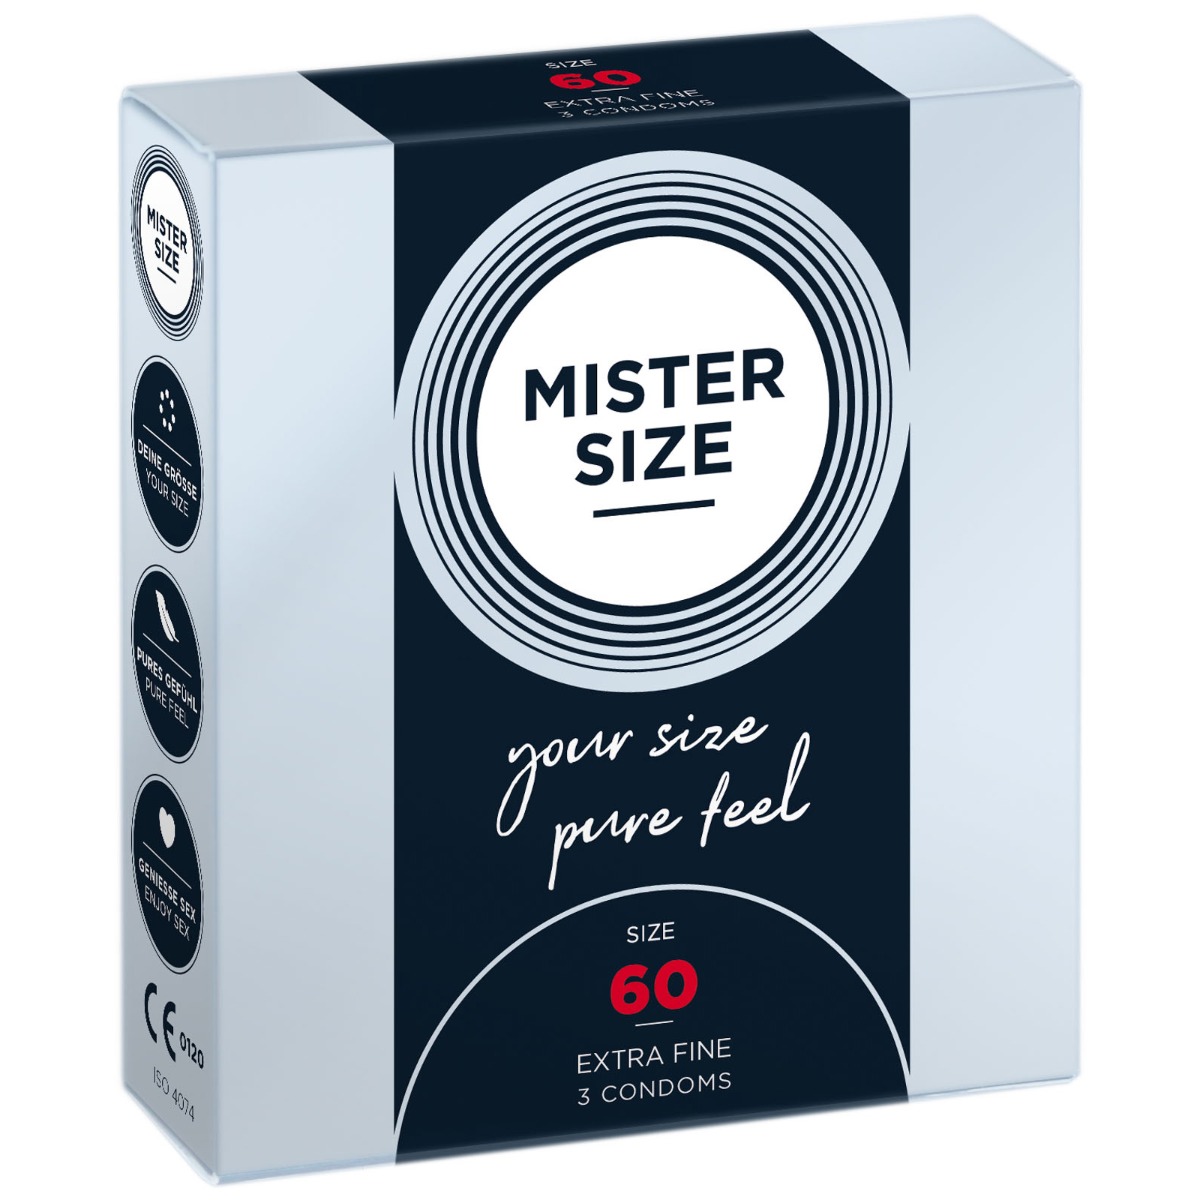 MISTER SIZE - pure feel Condoms - Size 60 mm (3 pack)